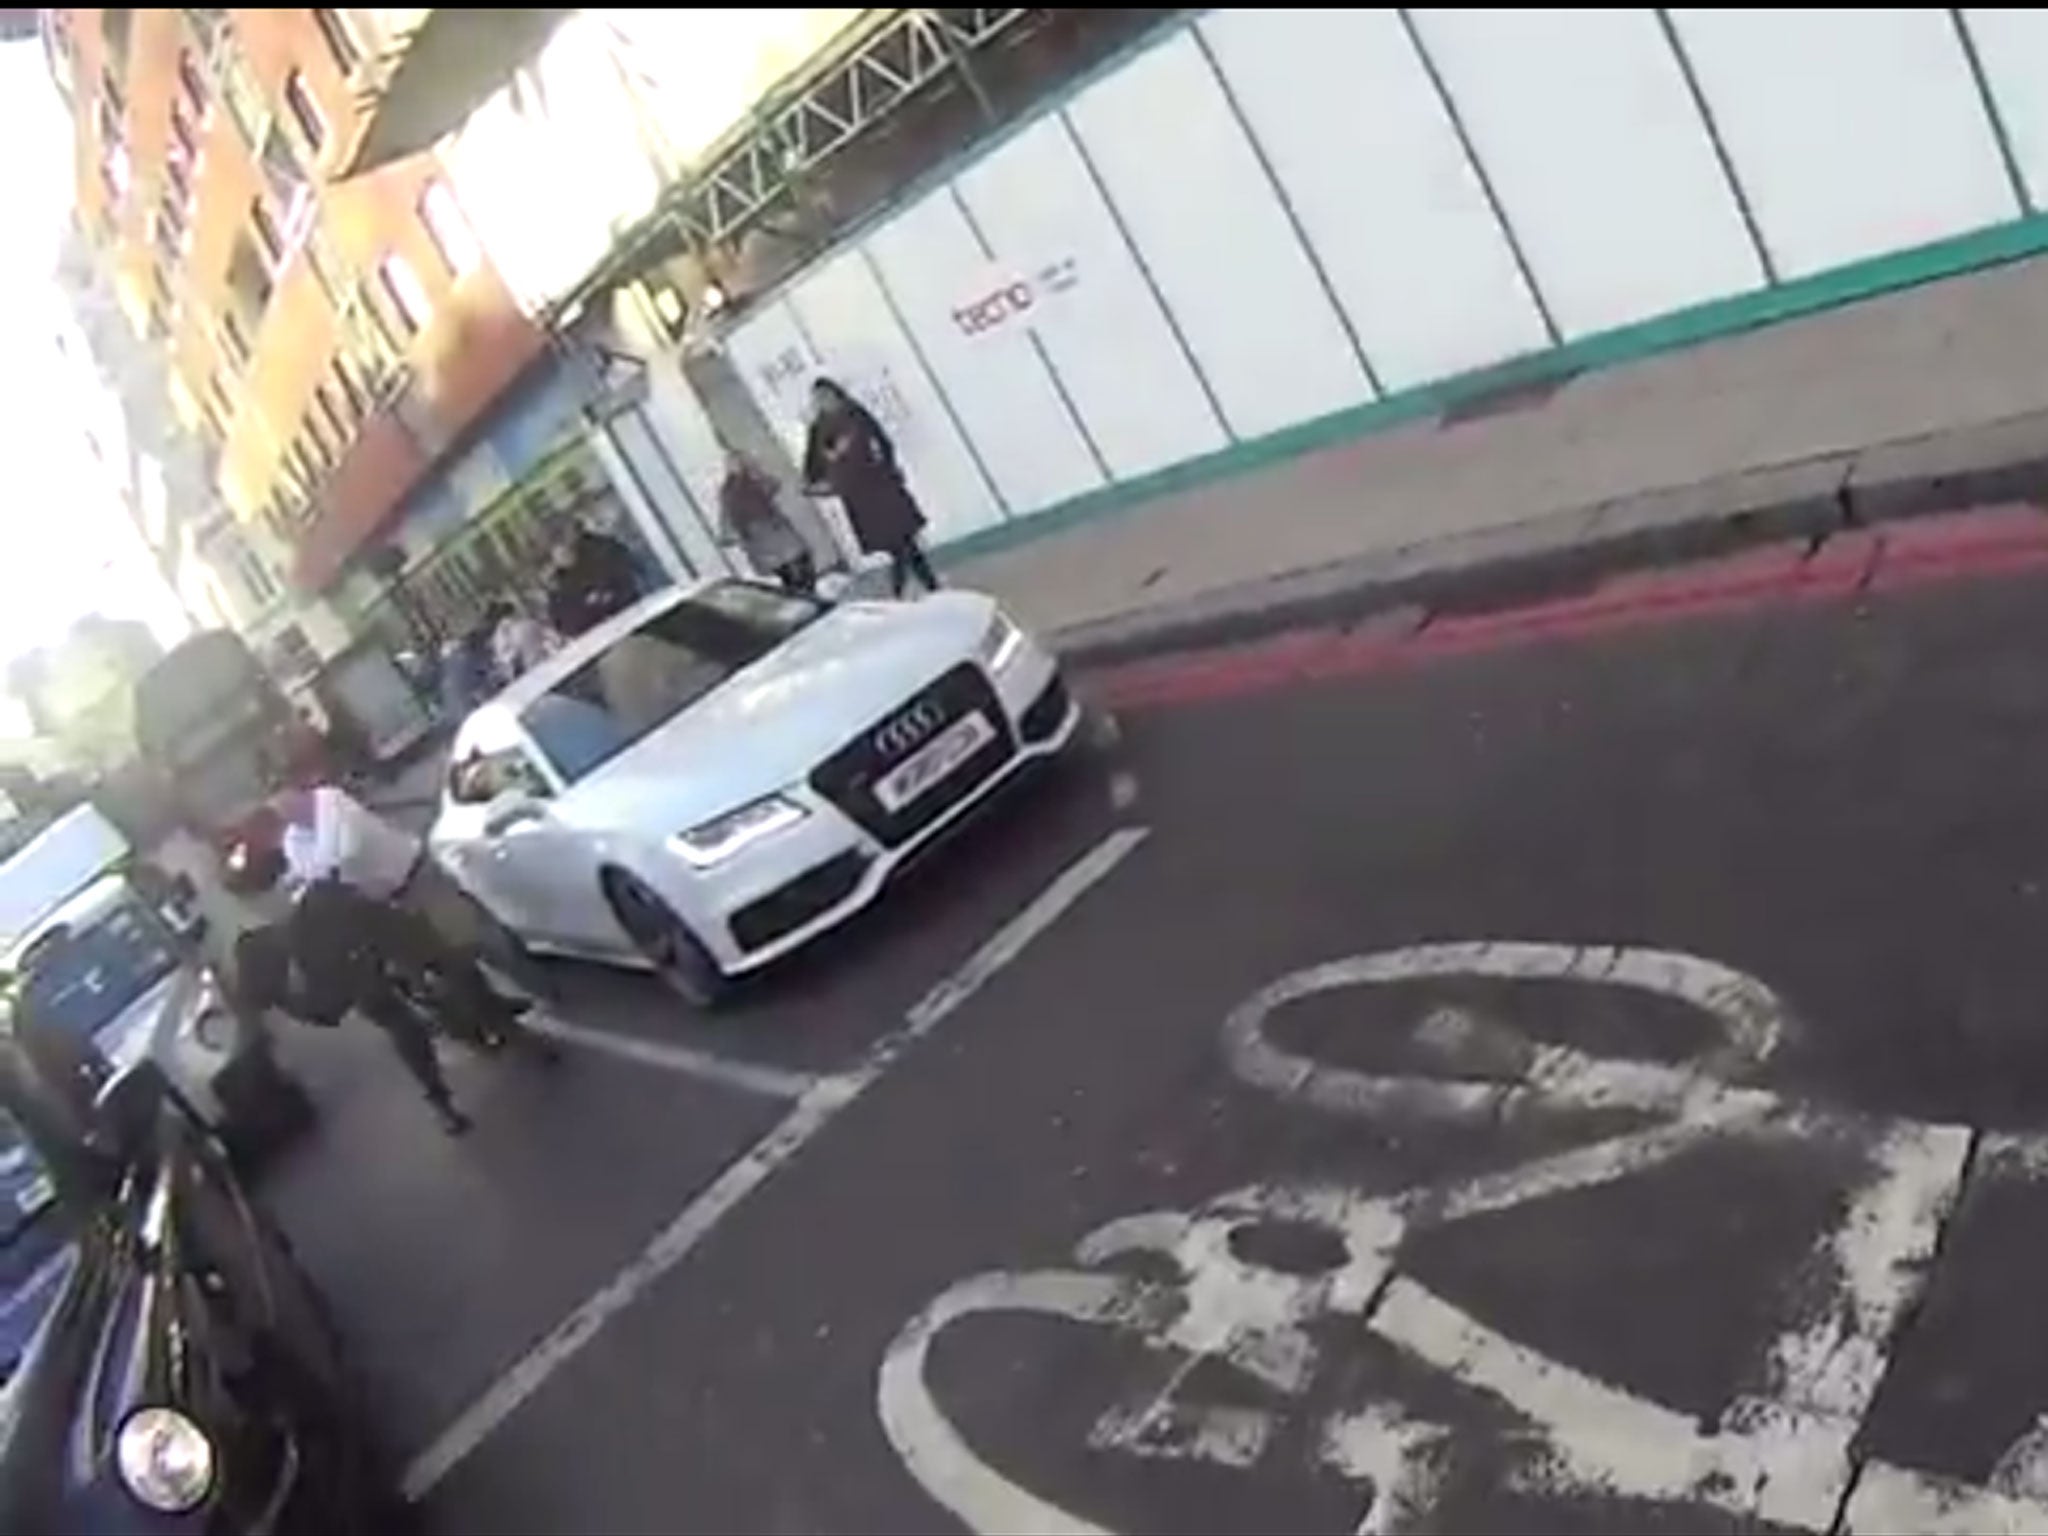 A still from footage appearing to show a cyclist allegedly being hit in the face by a car passenger in Farringdon, London